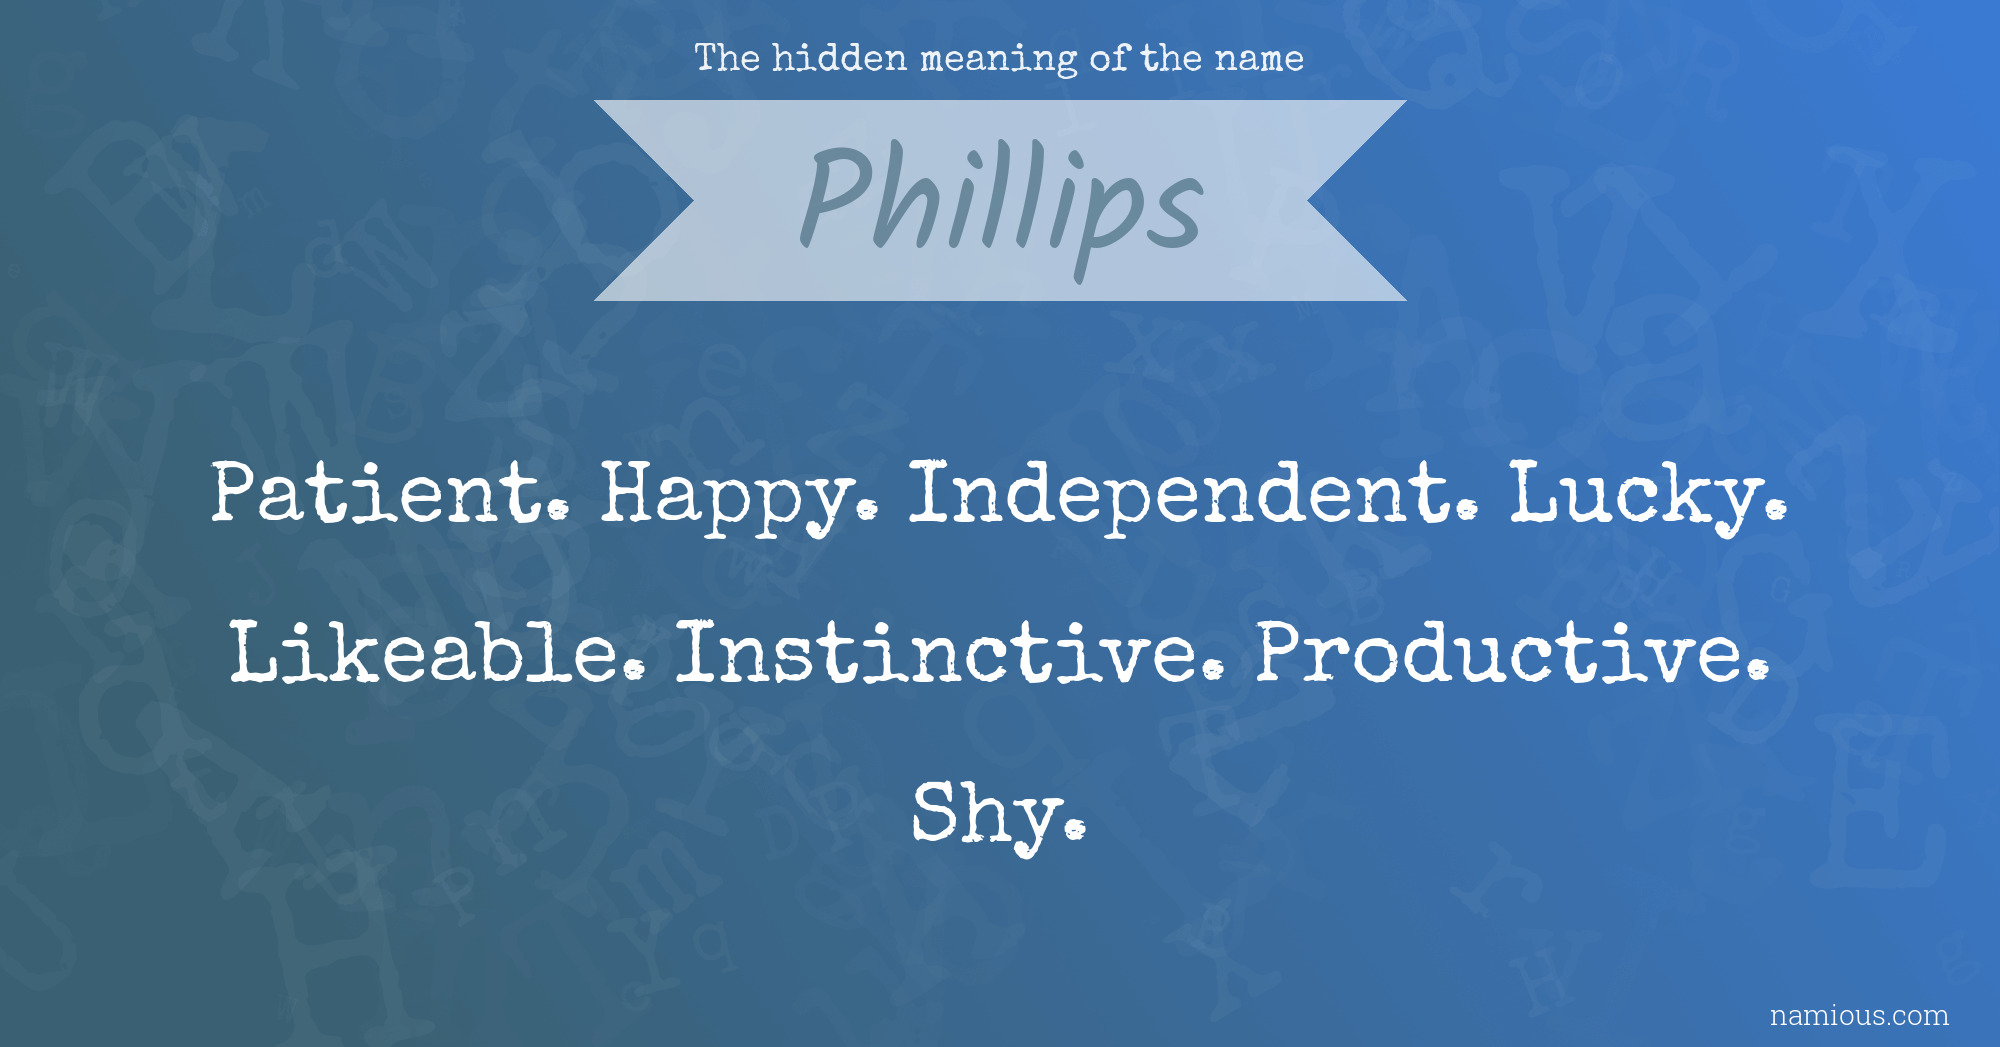 The hidden meaning of the name Phillips